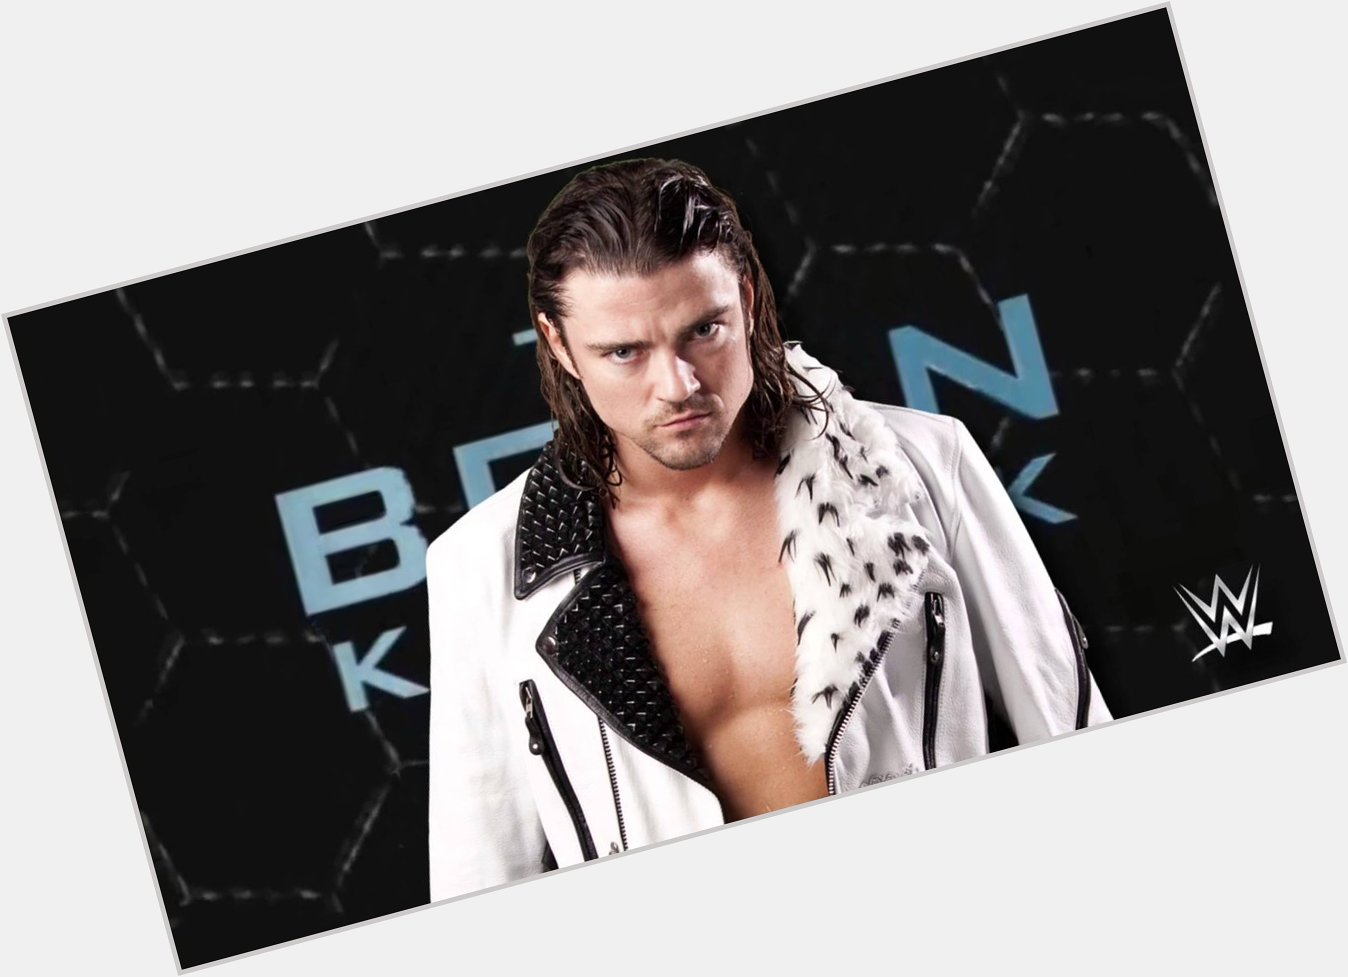 Happy birthday to the former wwe Cruiseweight Champion I miss you brian kendrick!!!! 